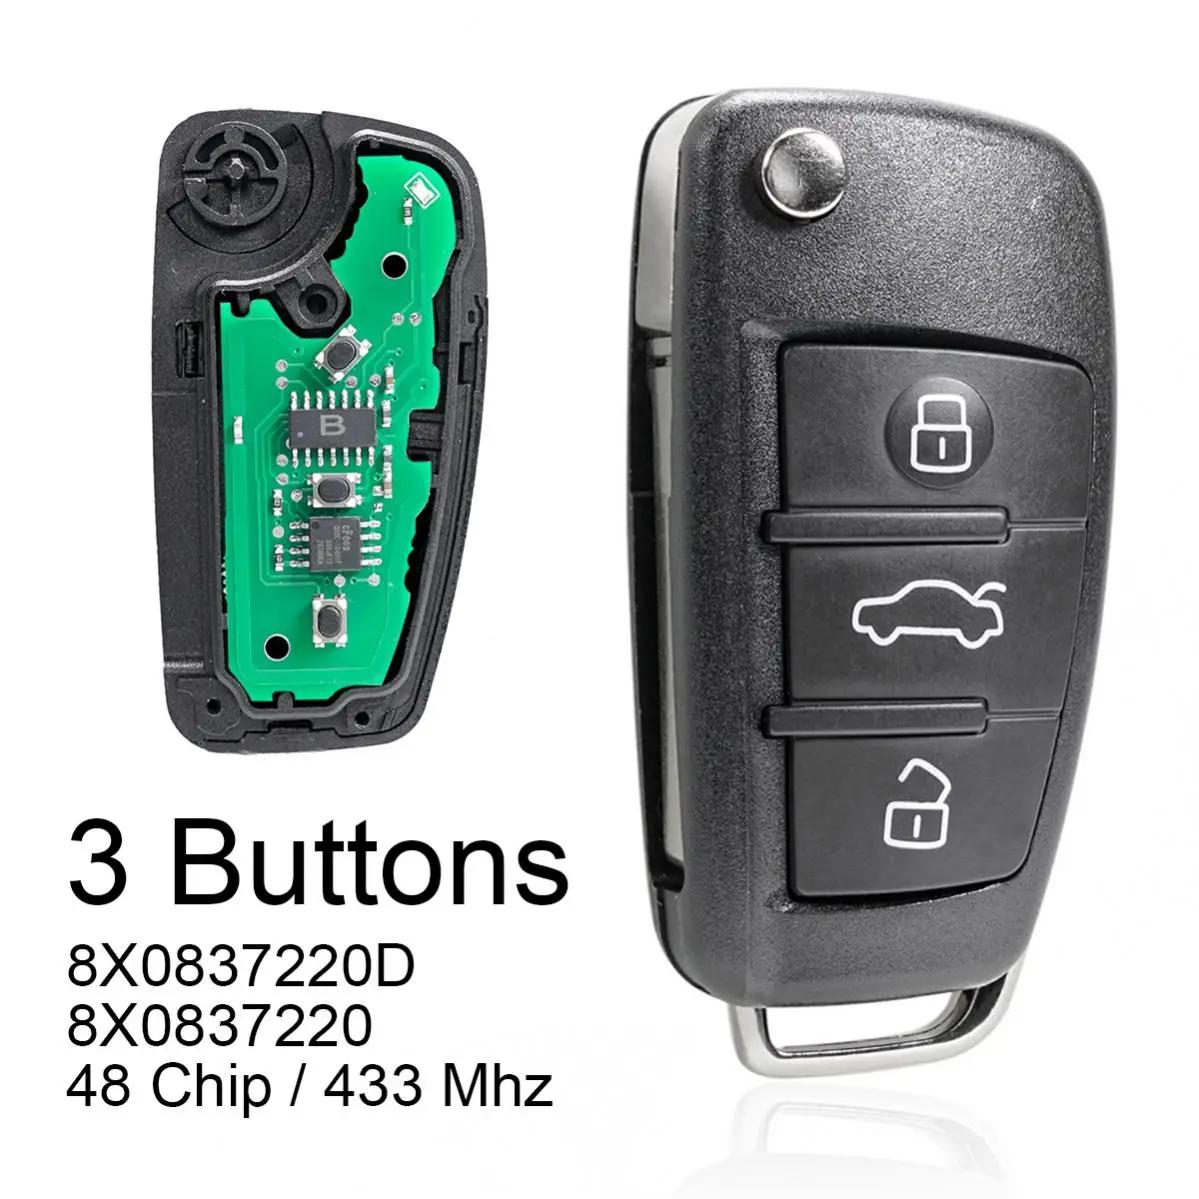 433Mhz 3 Buttons Car Remote Key with ID48 Chip /8X0837220D 8X0837220 for Audi- A1 Q3 S1 2010 2011 2012 2013 2014 2015 2016 2017 4 buttons 433mhz car key for hyundai i30 ix35 sonata genesis equus veloster 2009 2010 2011 2012 2013 2014 2015 remote key